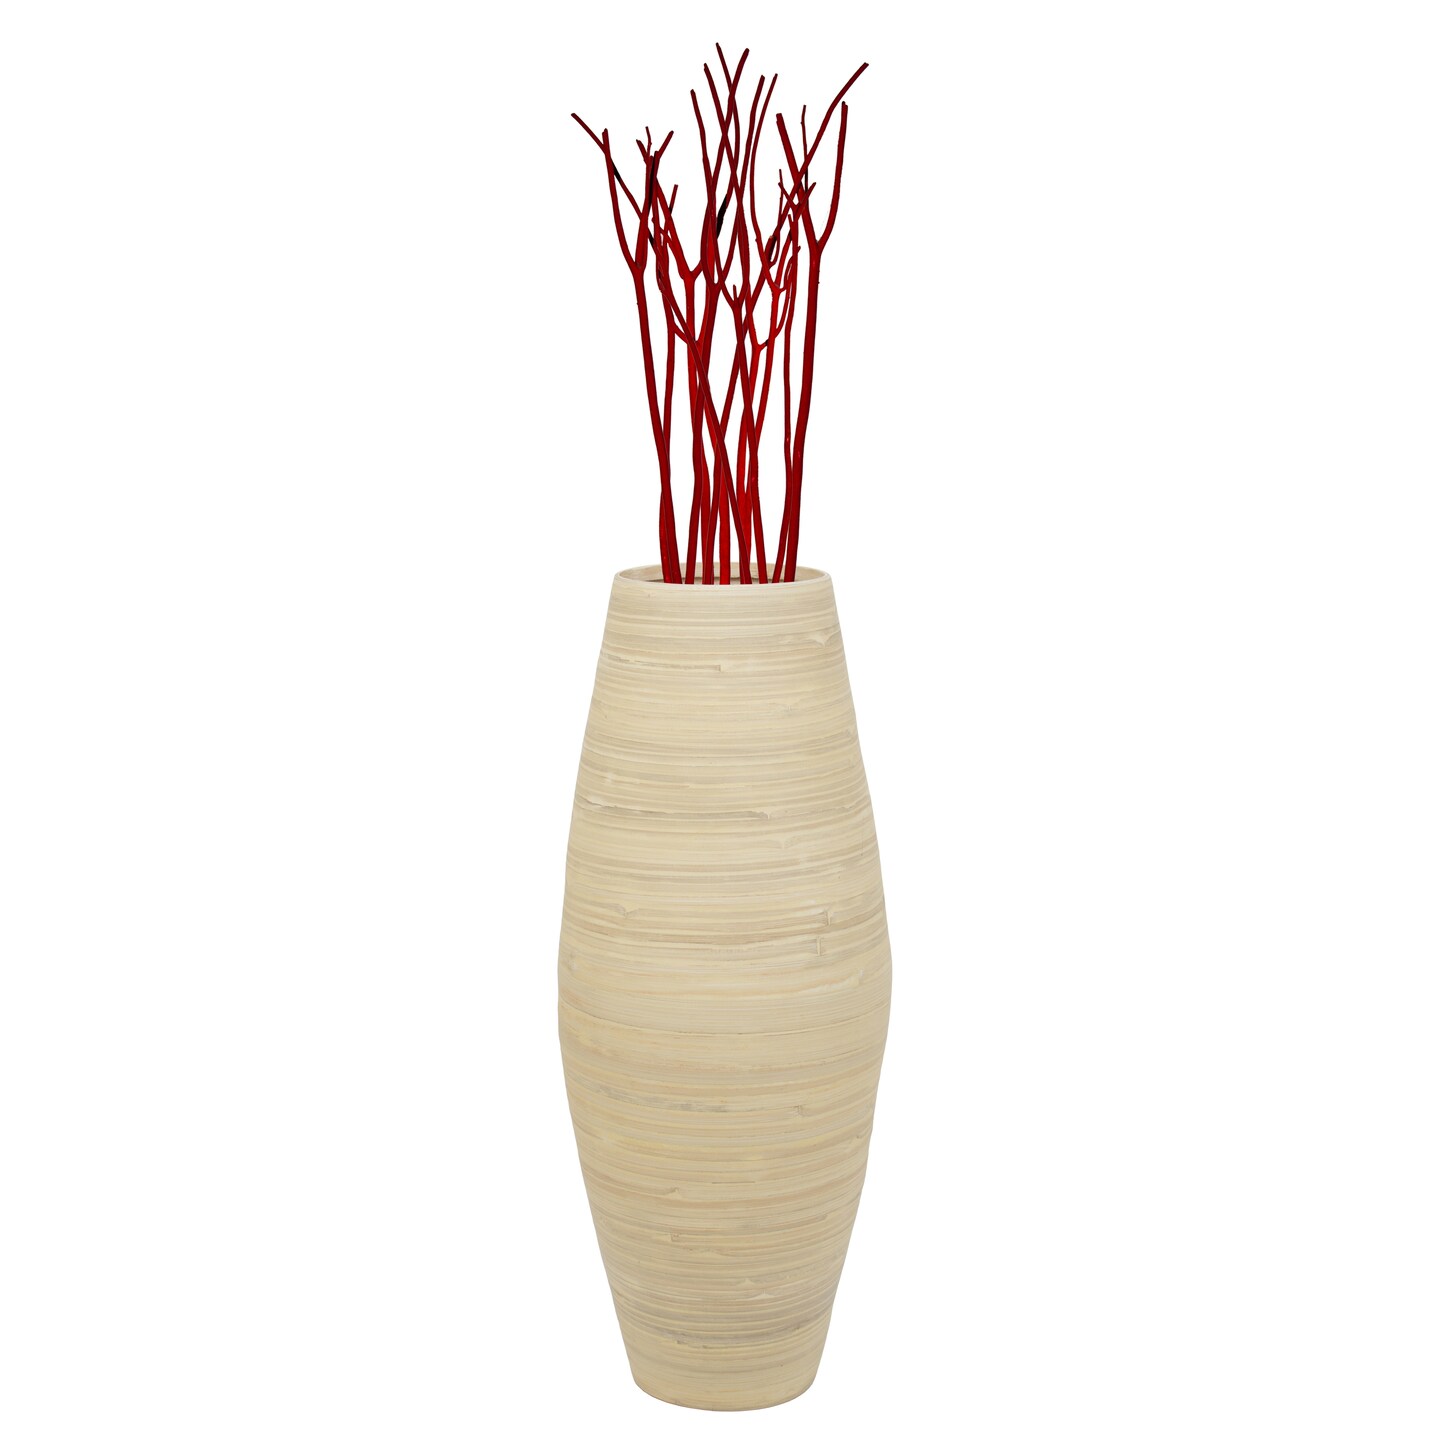 Uniquewise Bamboo Cylinder Shaped Floor Vase - Handcrafted Tall Decorative Vase - Ideal for Dining Room, Living Room, and Entryway - Elegant Statement Piece for Home Decoration and Stylish Ambiance Enhancement